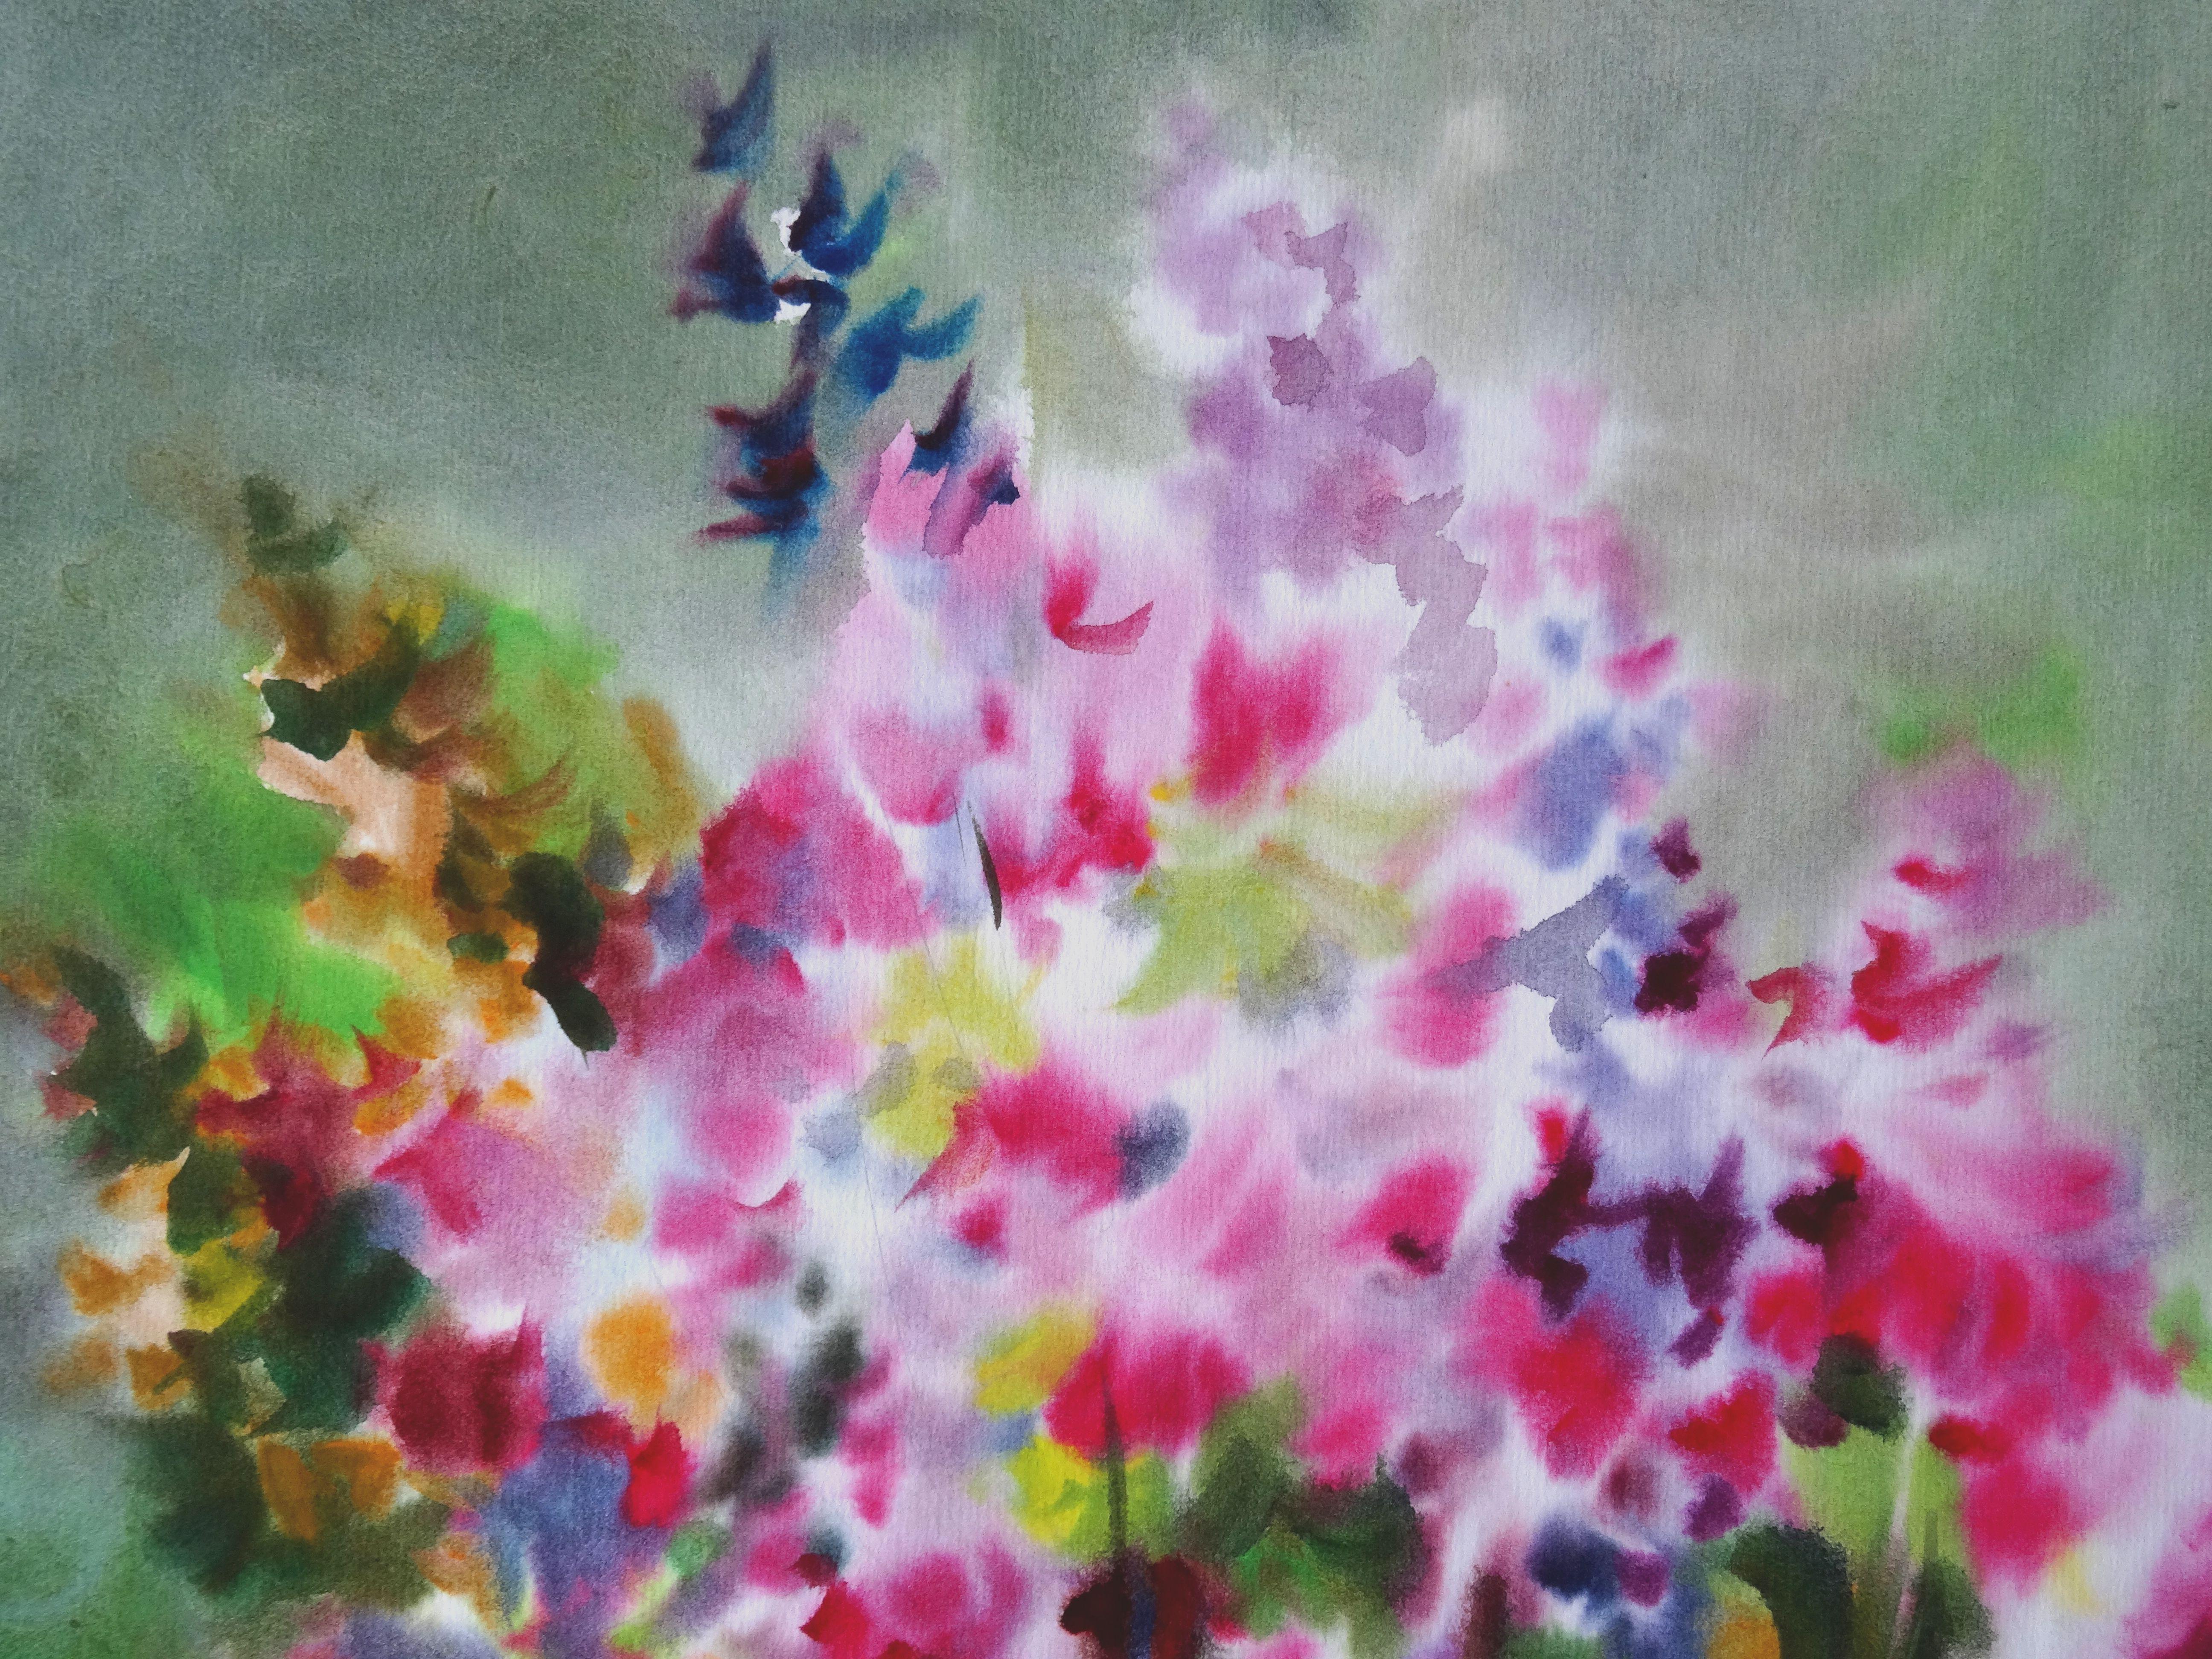 Bright summer flowers. 2020. Watercolor, paper, 74 x 59 cm - Realist Painting by Zigmunds Snore 